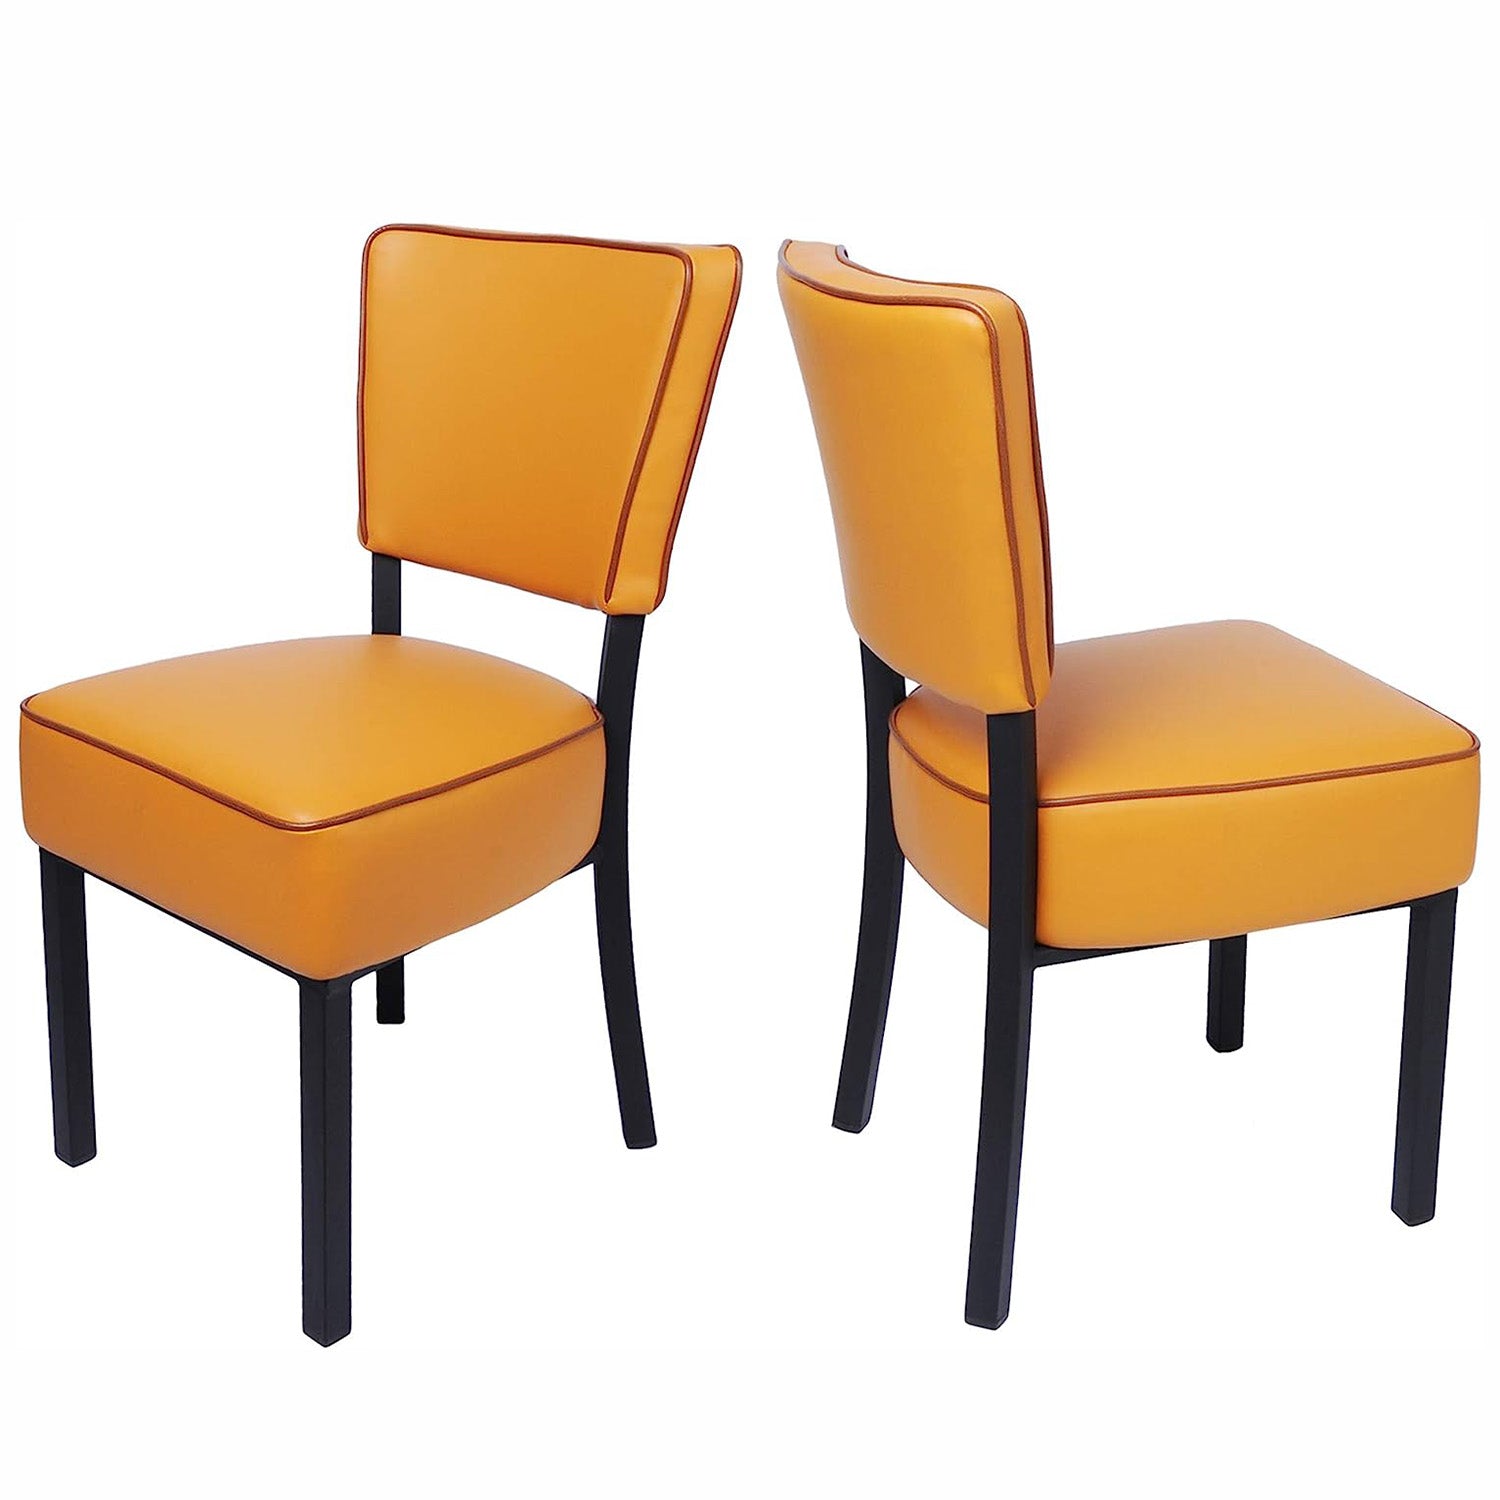 LUCKYERMORE Set of 2 Leather Side Chairs Kitchen Dining Chairs with Upholstered and Backrest, Orange